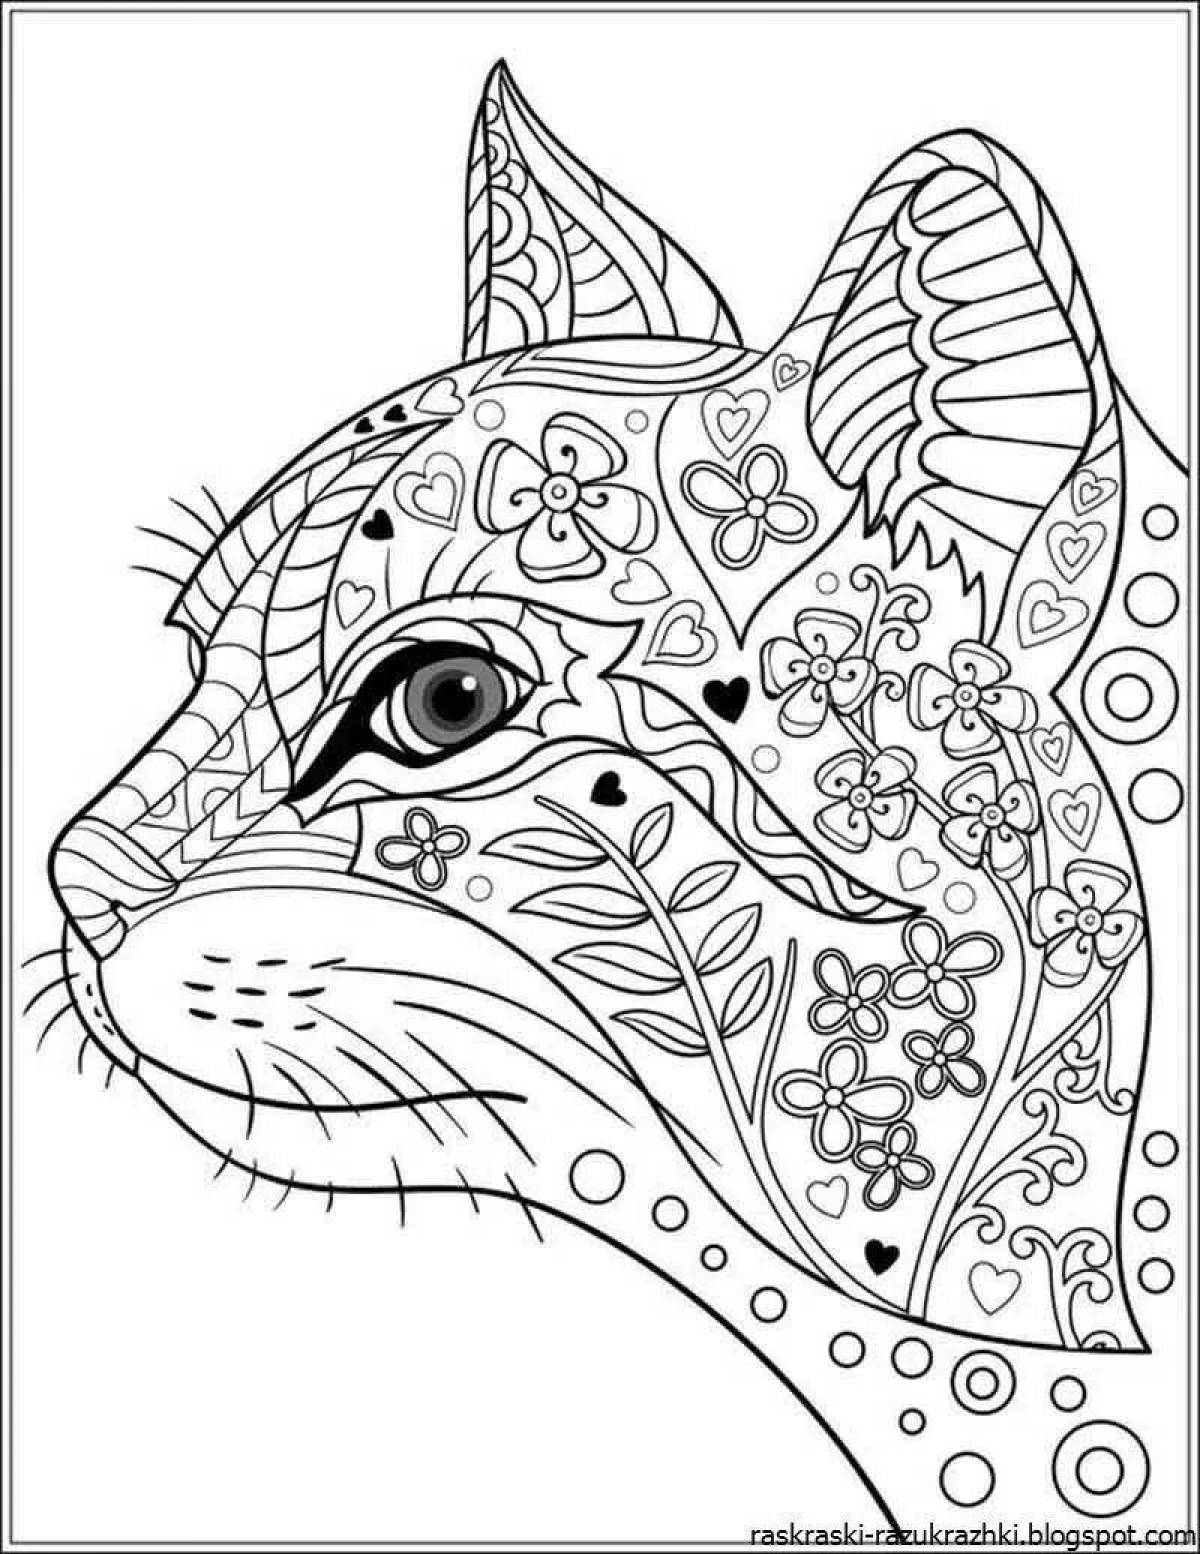 Bright anti-stress coloring book for girls 9-10 years old